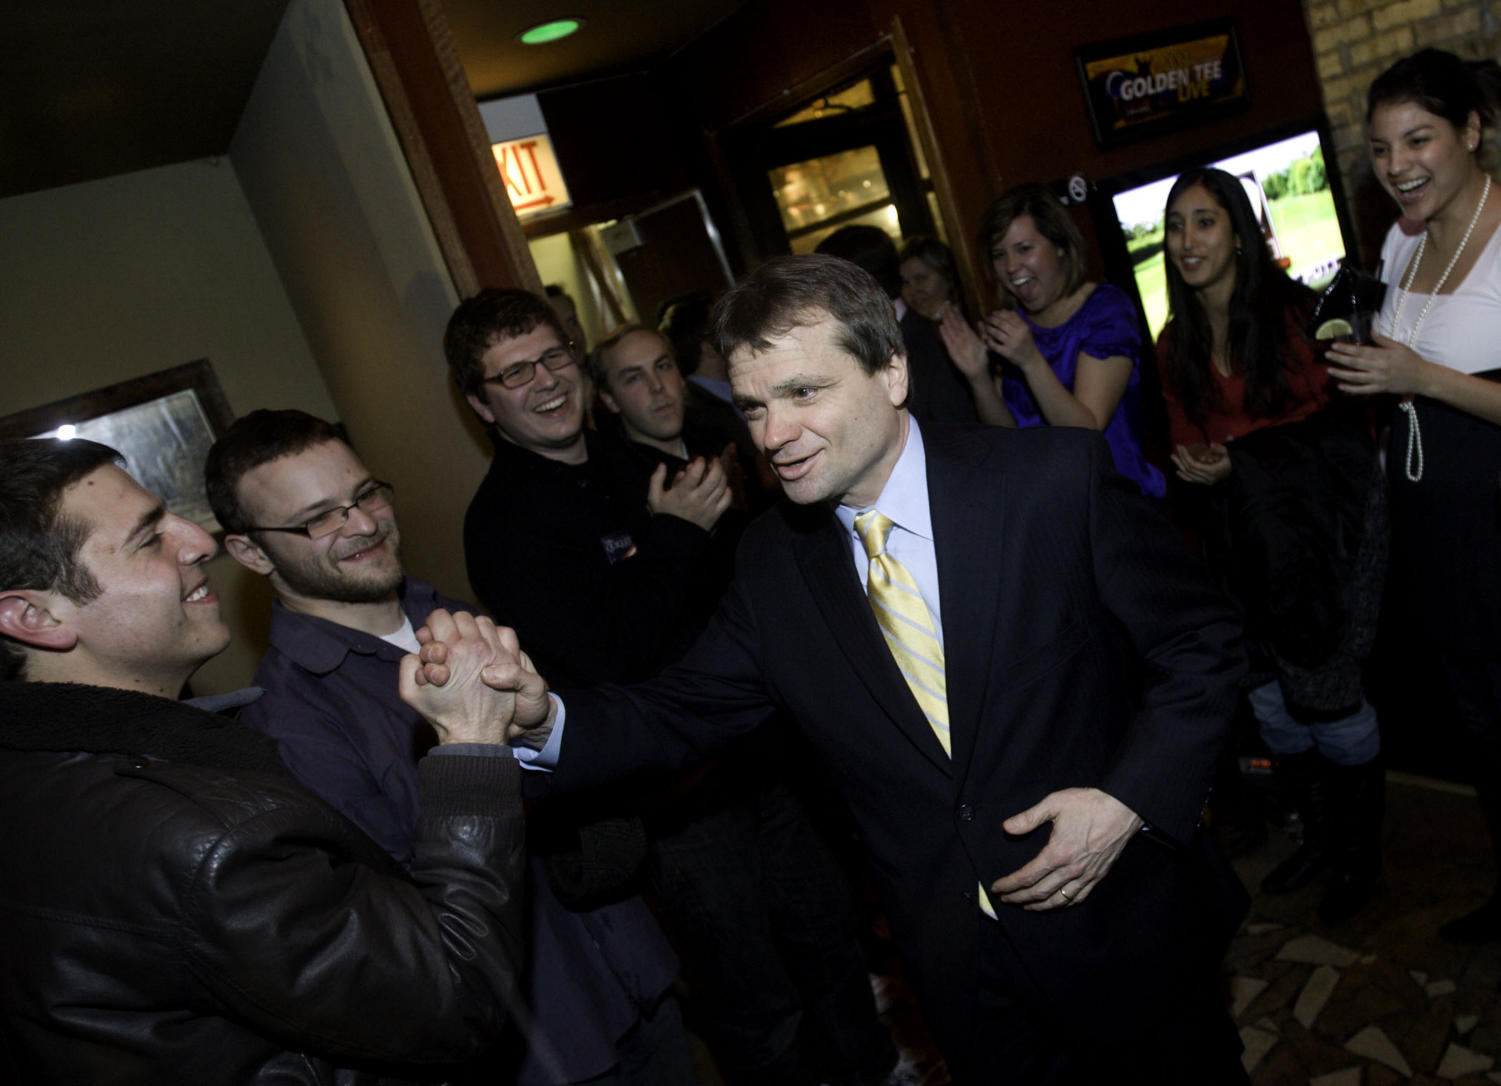 Mike Quigley enters the Wrigleyville brewery Red Ivy to deliver his victory speech.